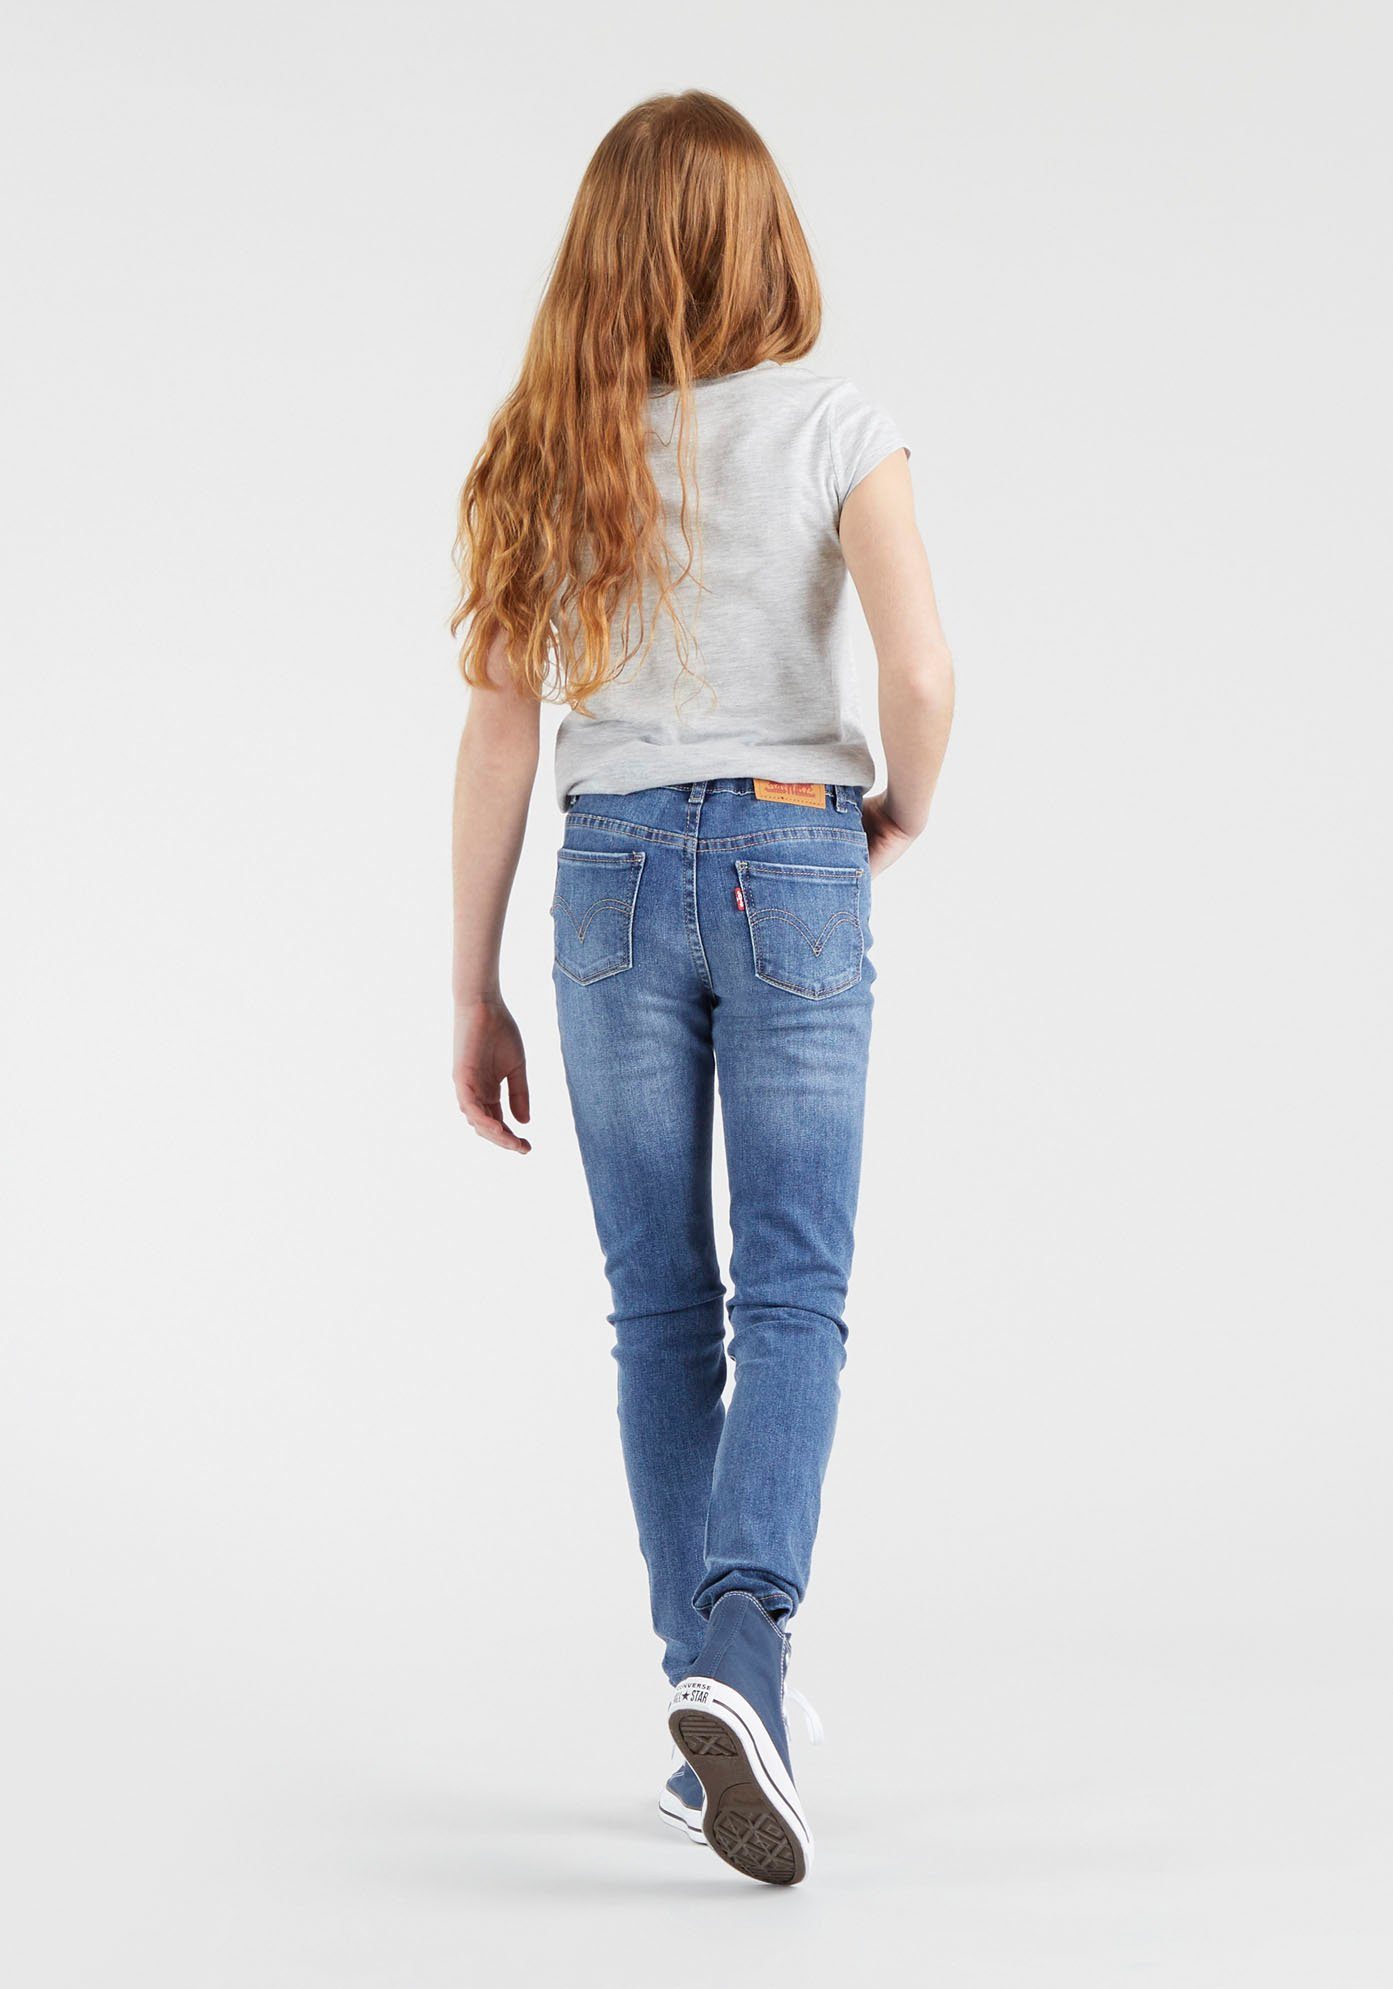 720™ blue GIRLS HIGH Stretch-Jeans used SKINNY for Levi's® mid SUPER RISE Kids